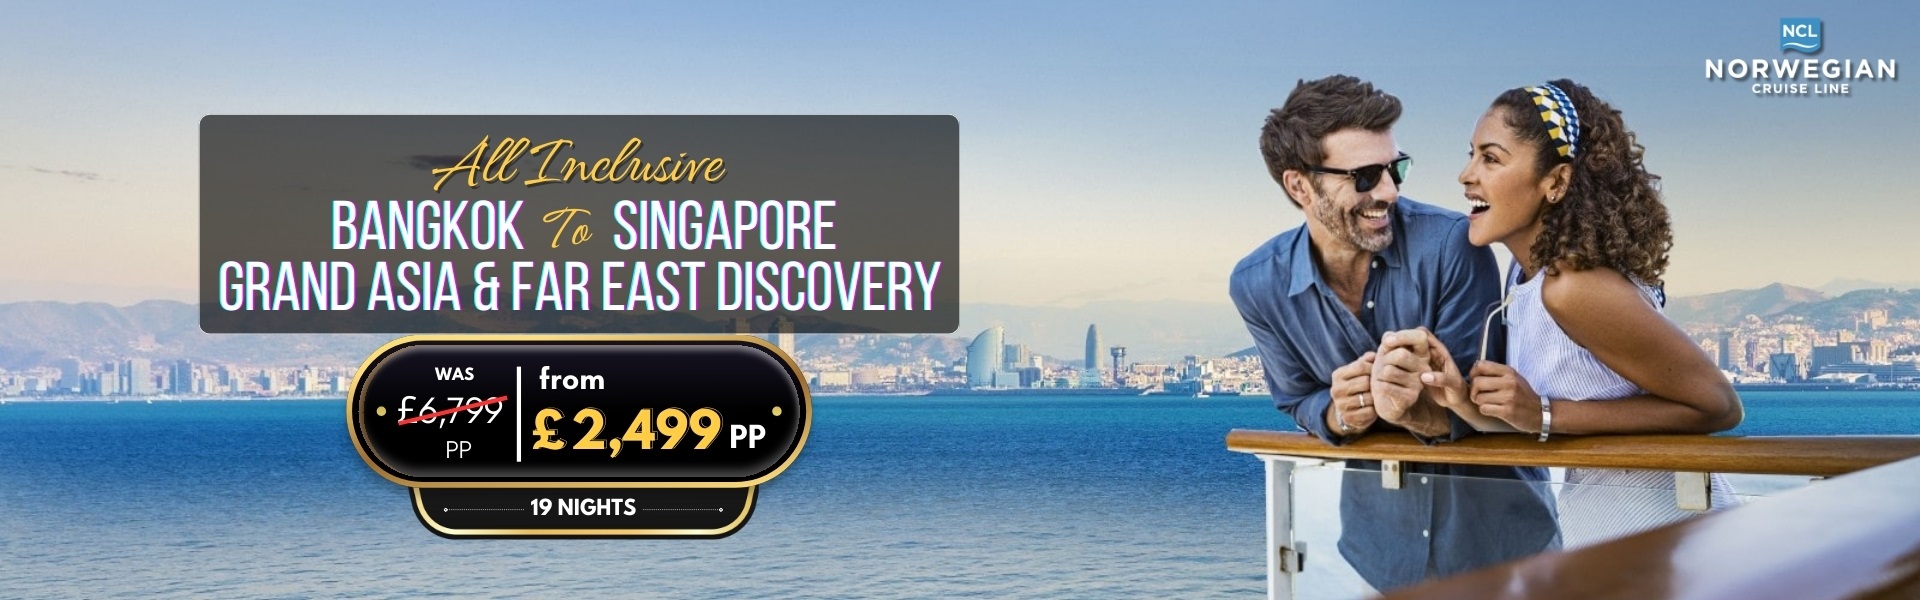 19 nights   All Inclusive Bangkok To Singapore Grand Asia & Far East Discovery